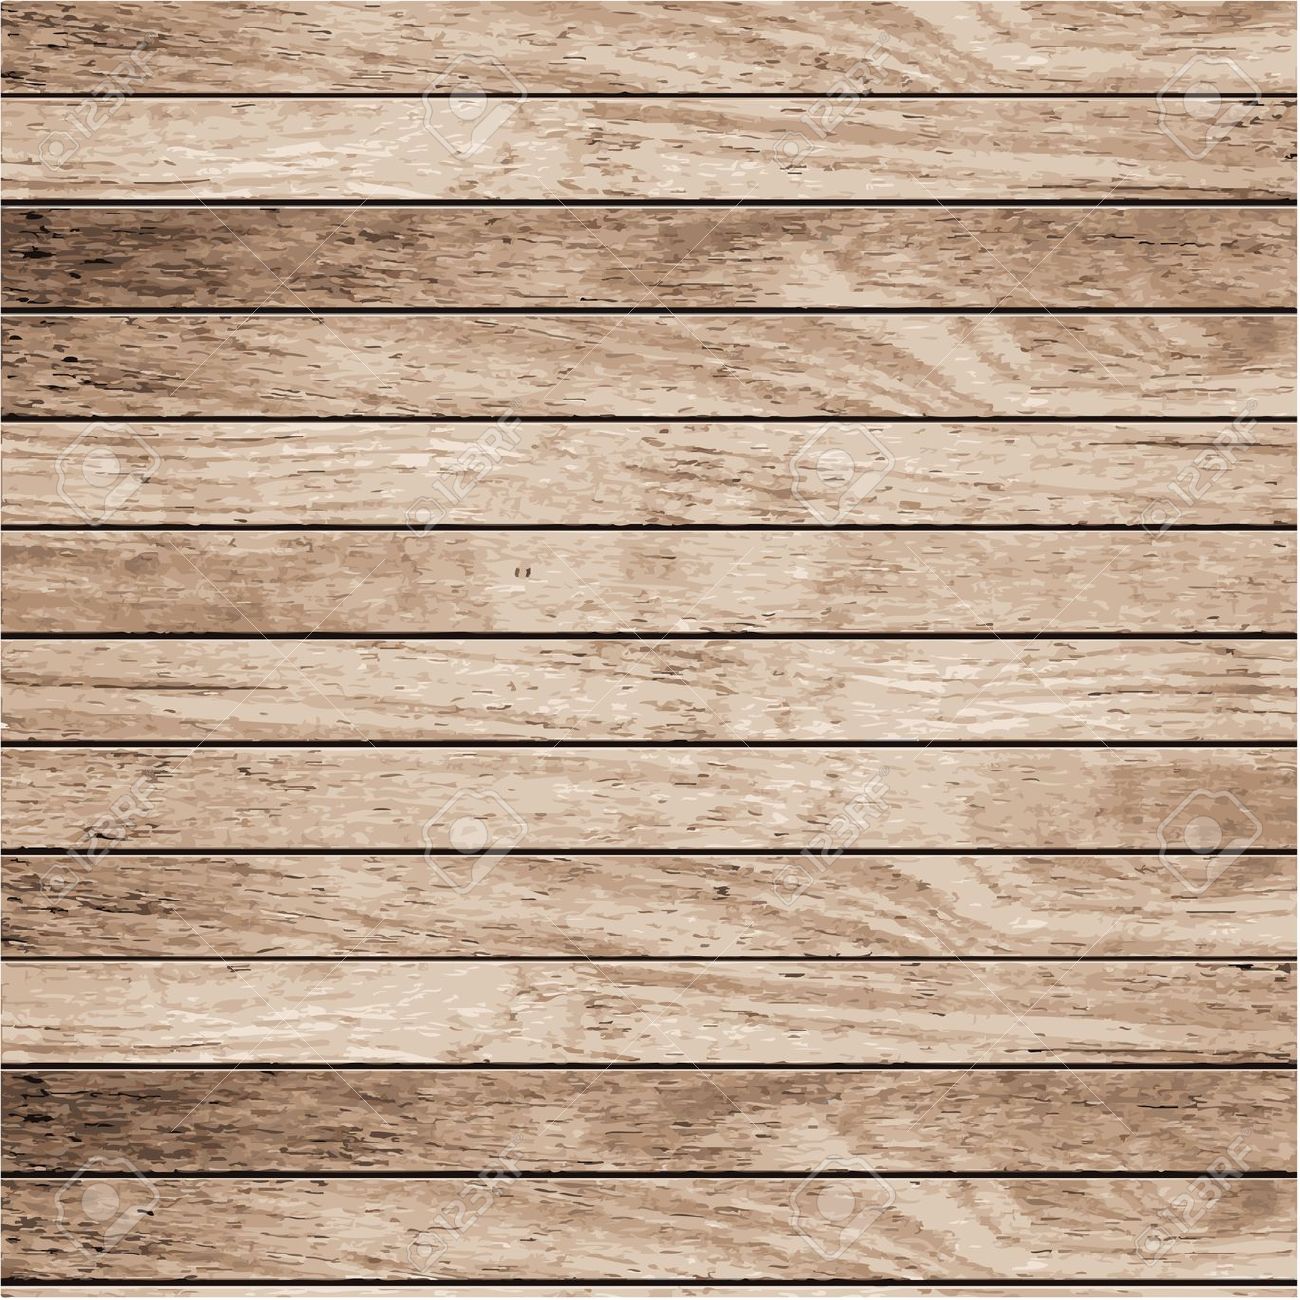 Free Woodgrain Background Cliparts, Download Free Woodgrain Background